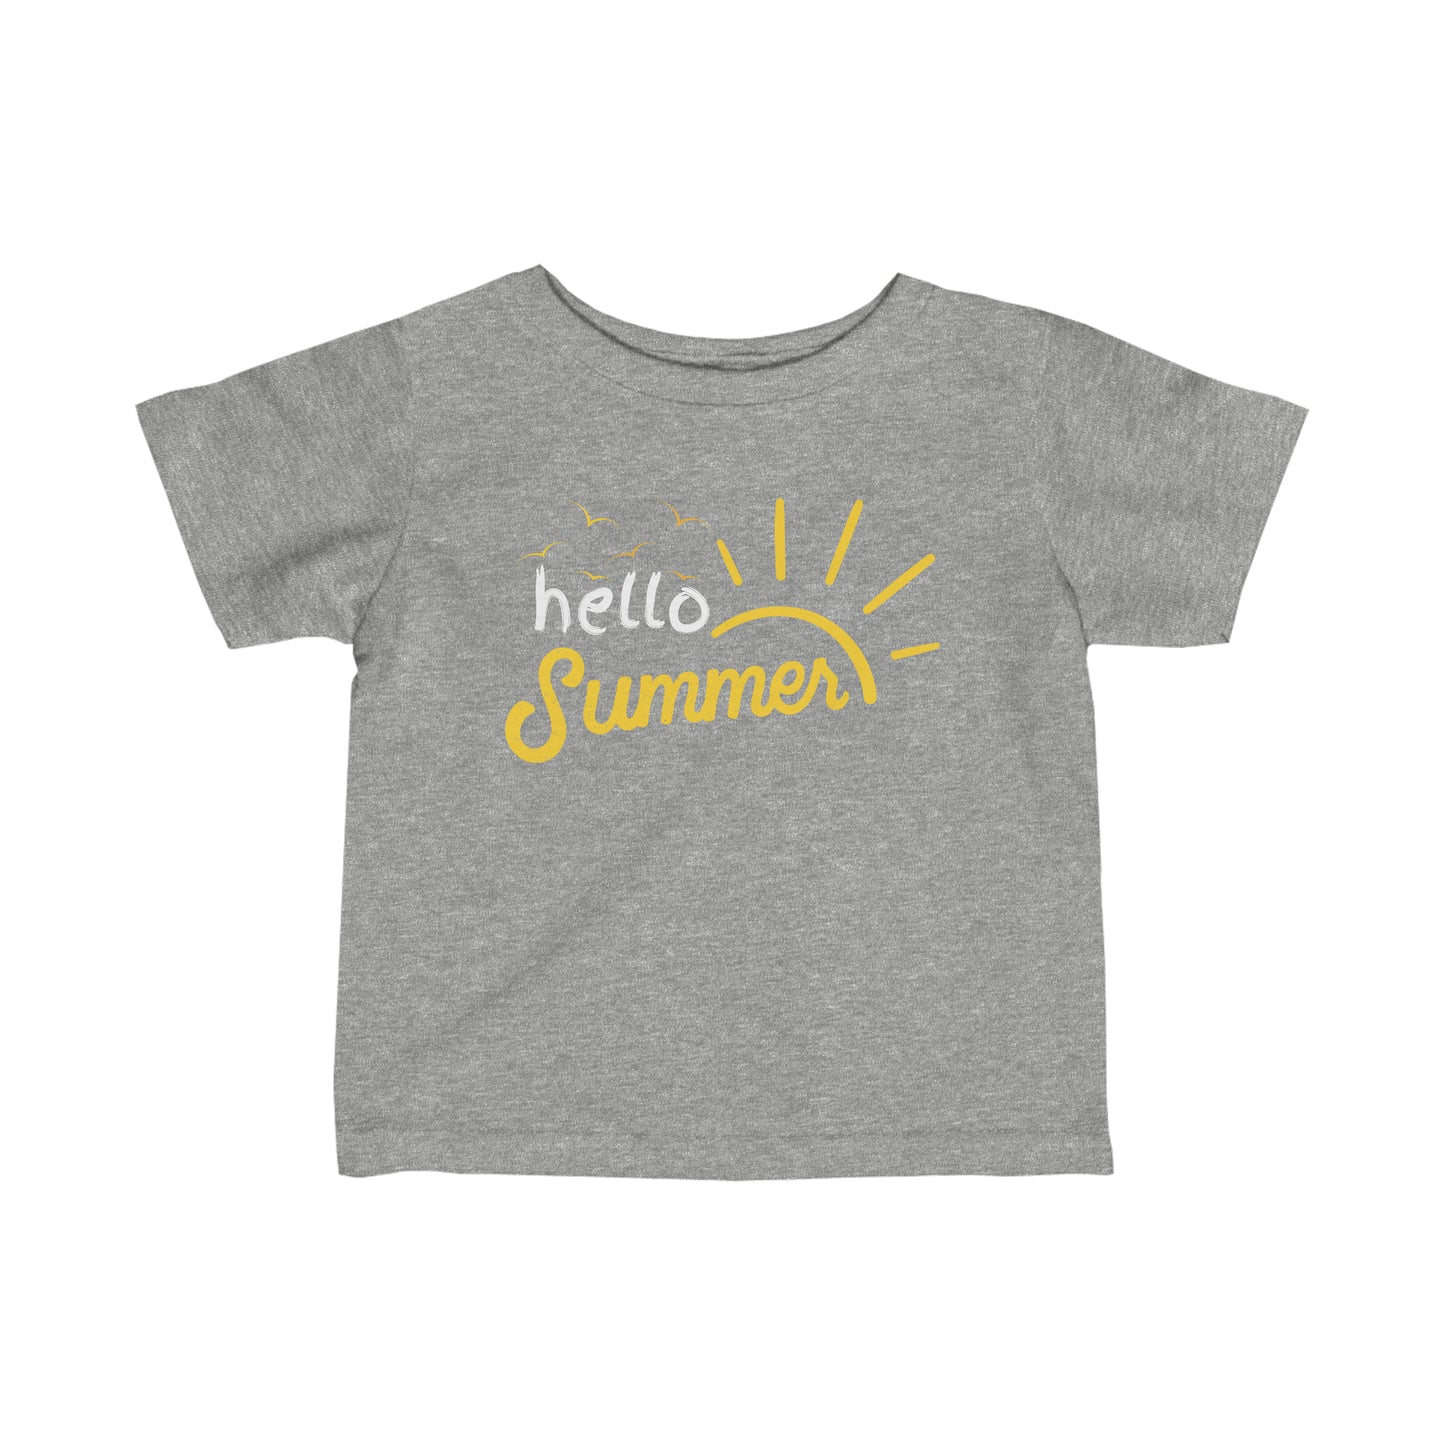 Premium Baby T-Shirt for Summer Vacation